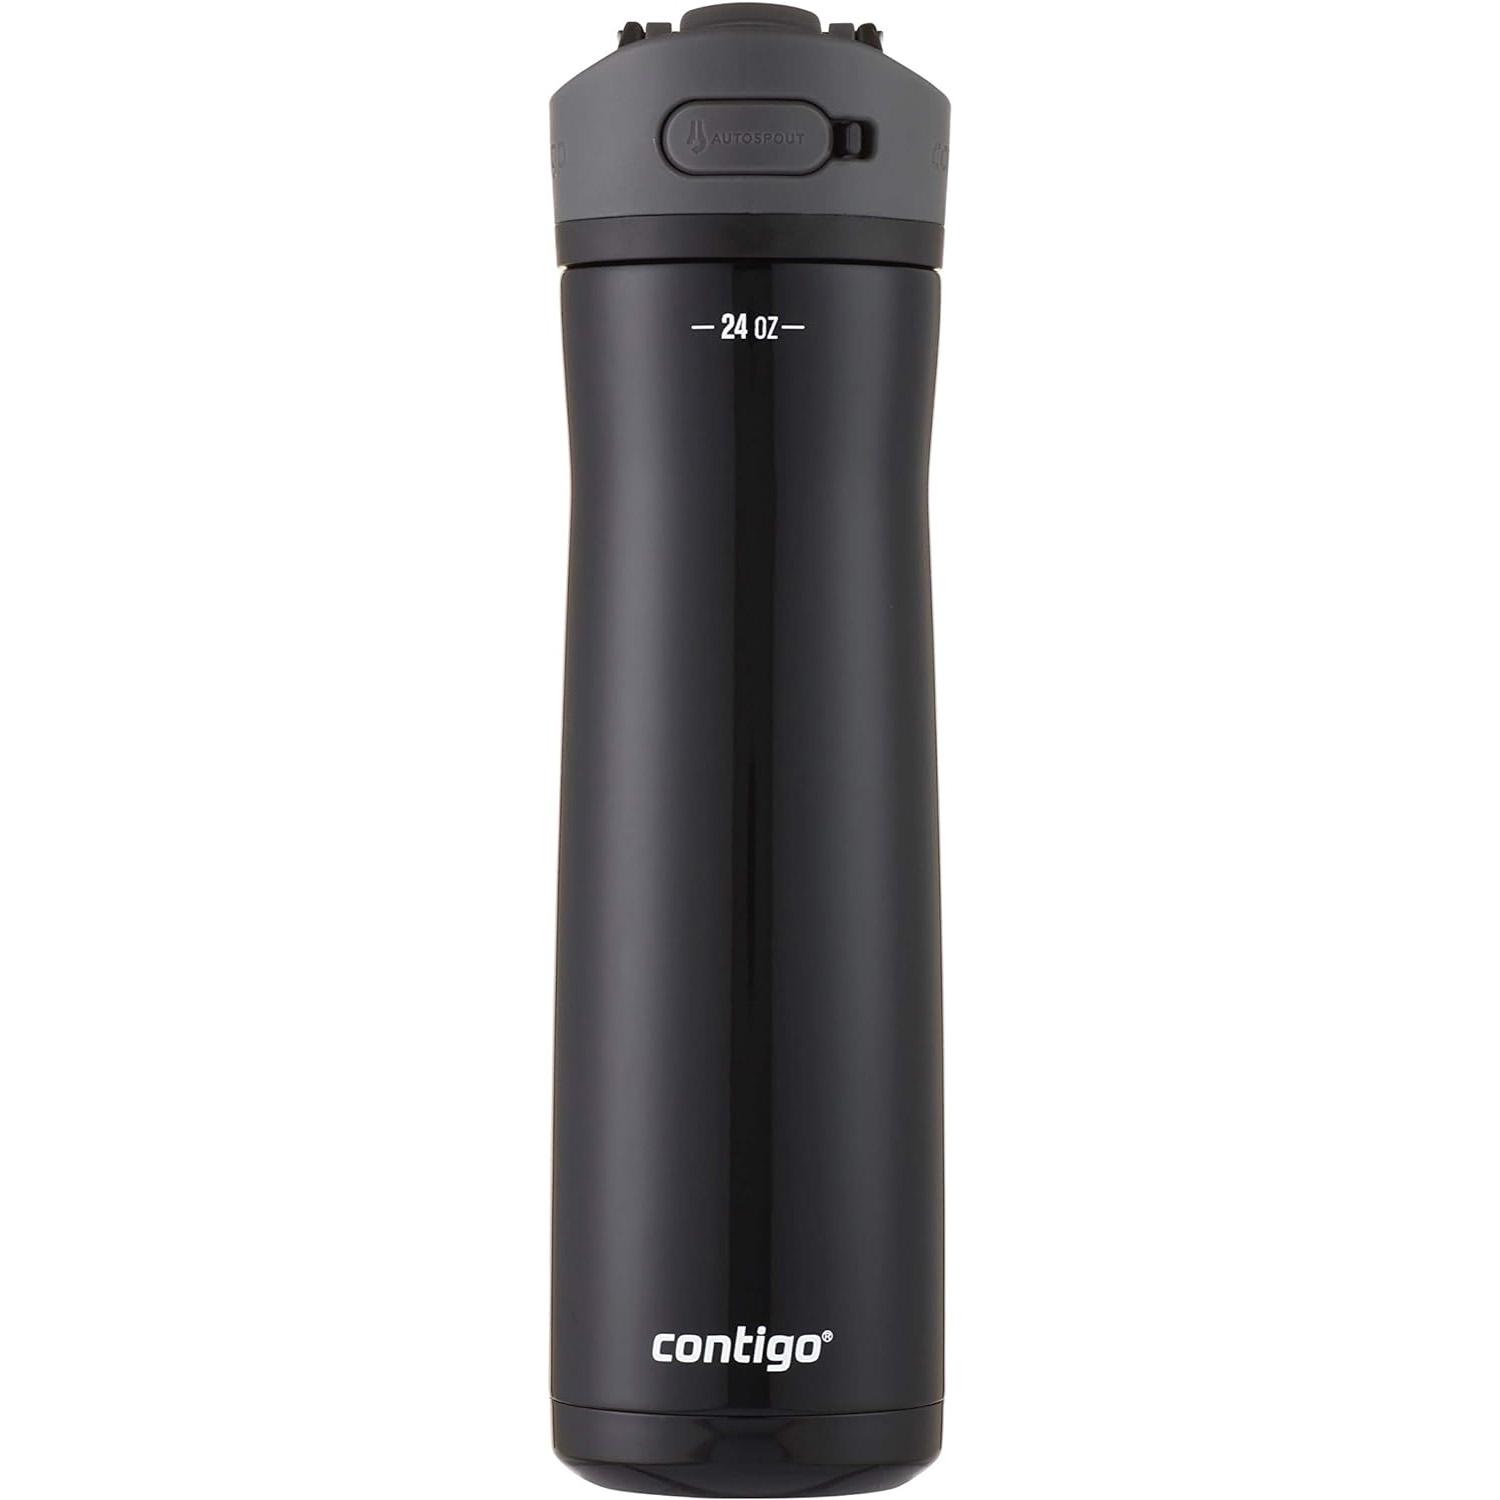 Contigo Ashland Chill Stainless Steel Water Bottle Licorice for $12.99